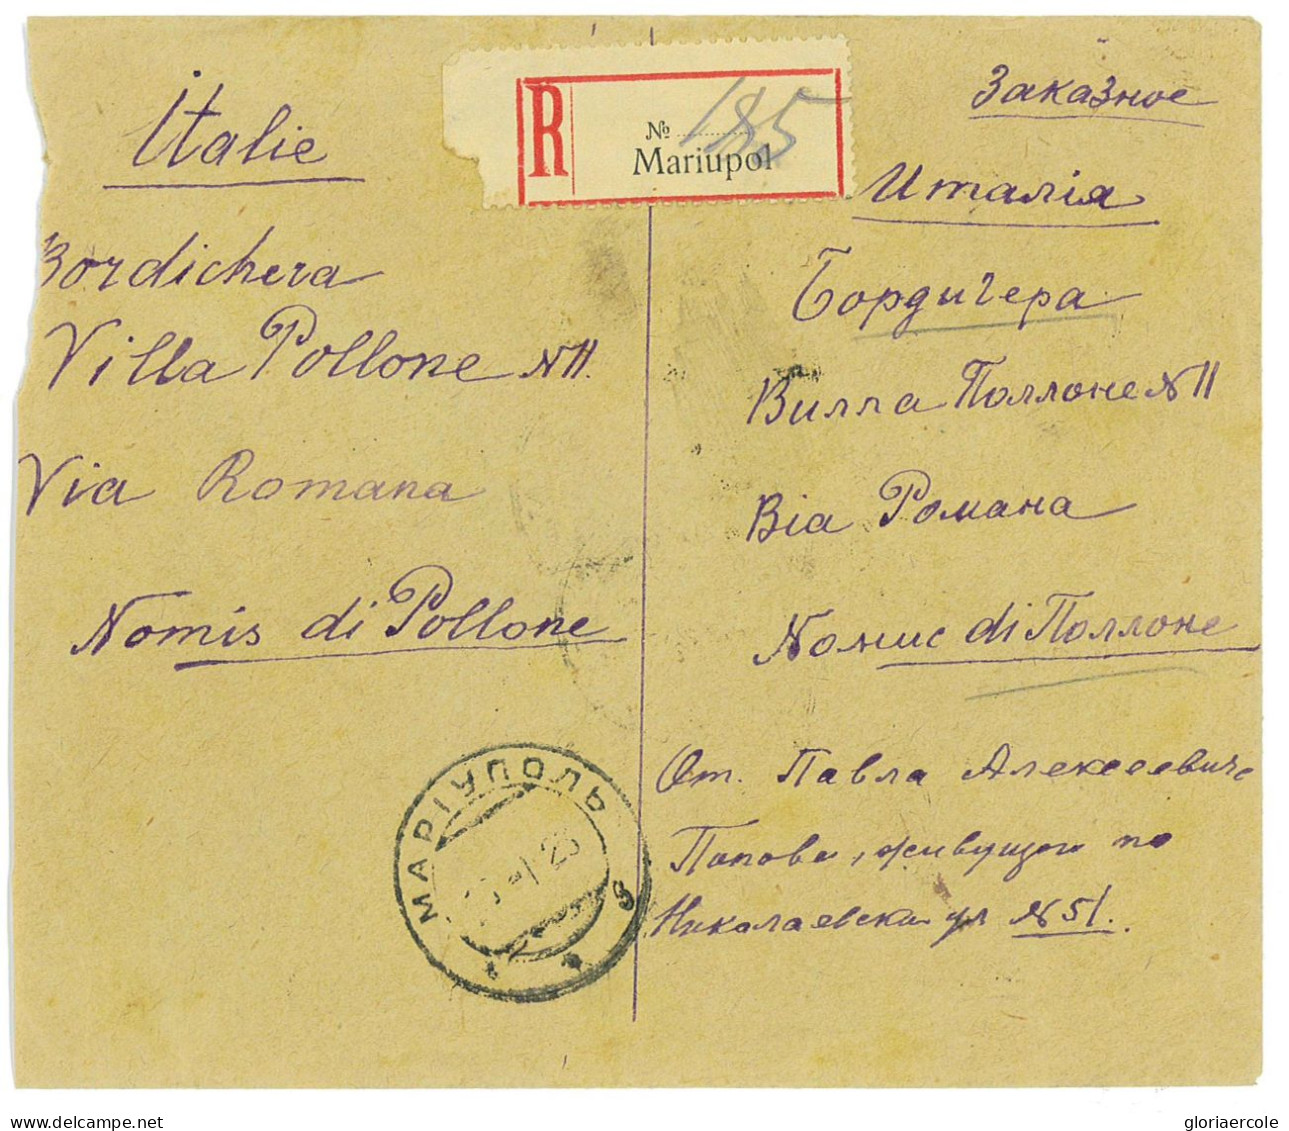 P2912 - RUSSIA , 700 RUBEL LETTER REGISTERED FROM MARIUPOL 1923 TO ITALY - Briefe U. Dokumente